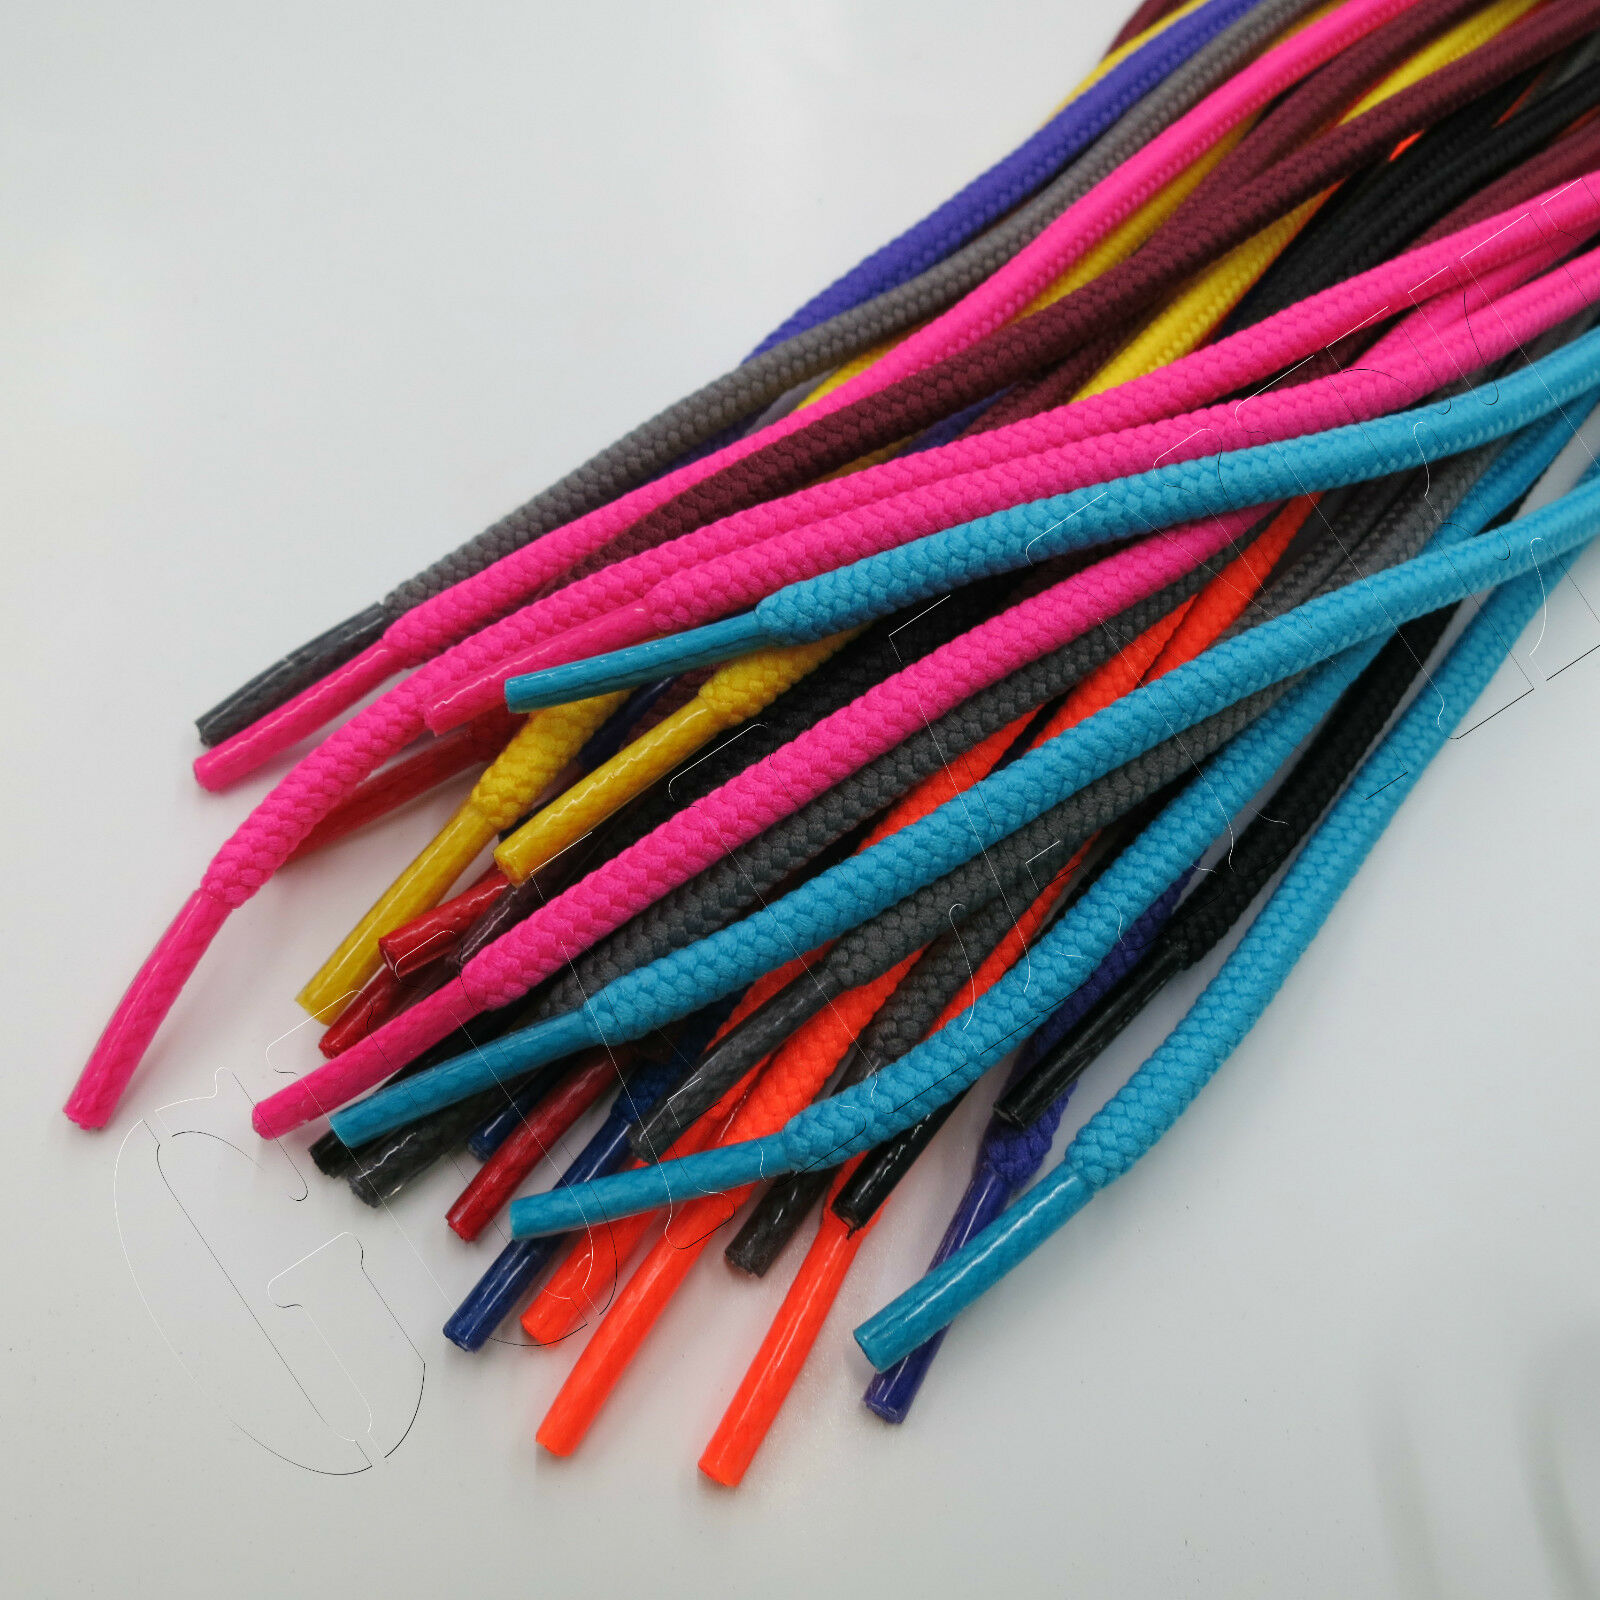 3/16" Round Athletic Shoelaces Sport Sneakers Shoe Laces Neon Colors Strings